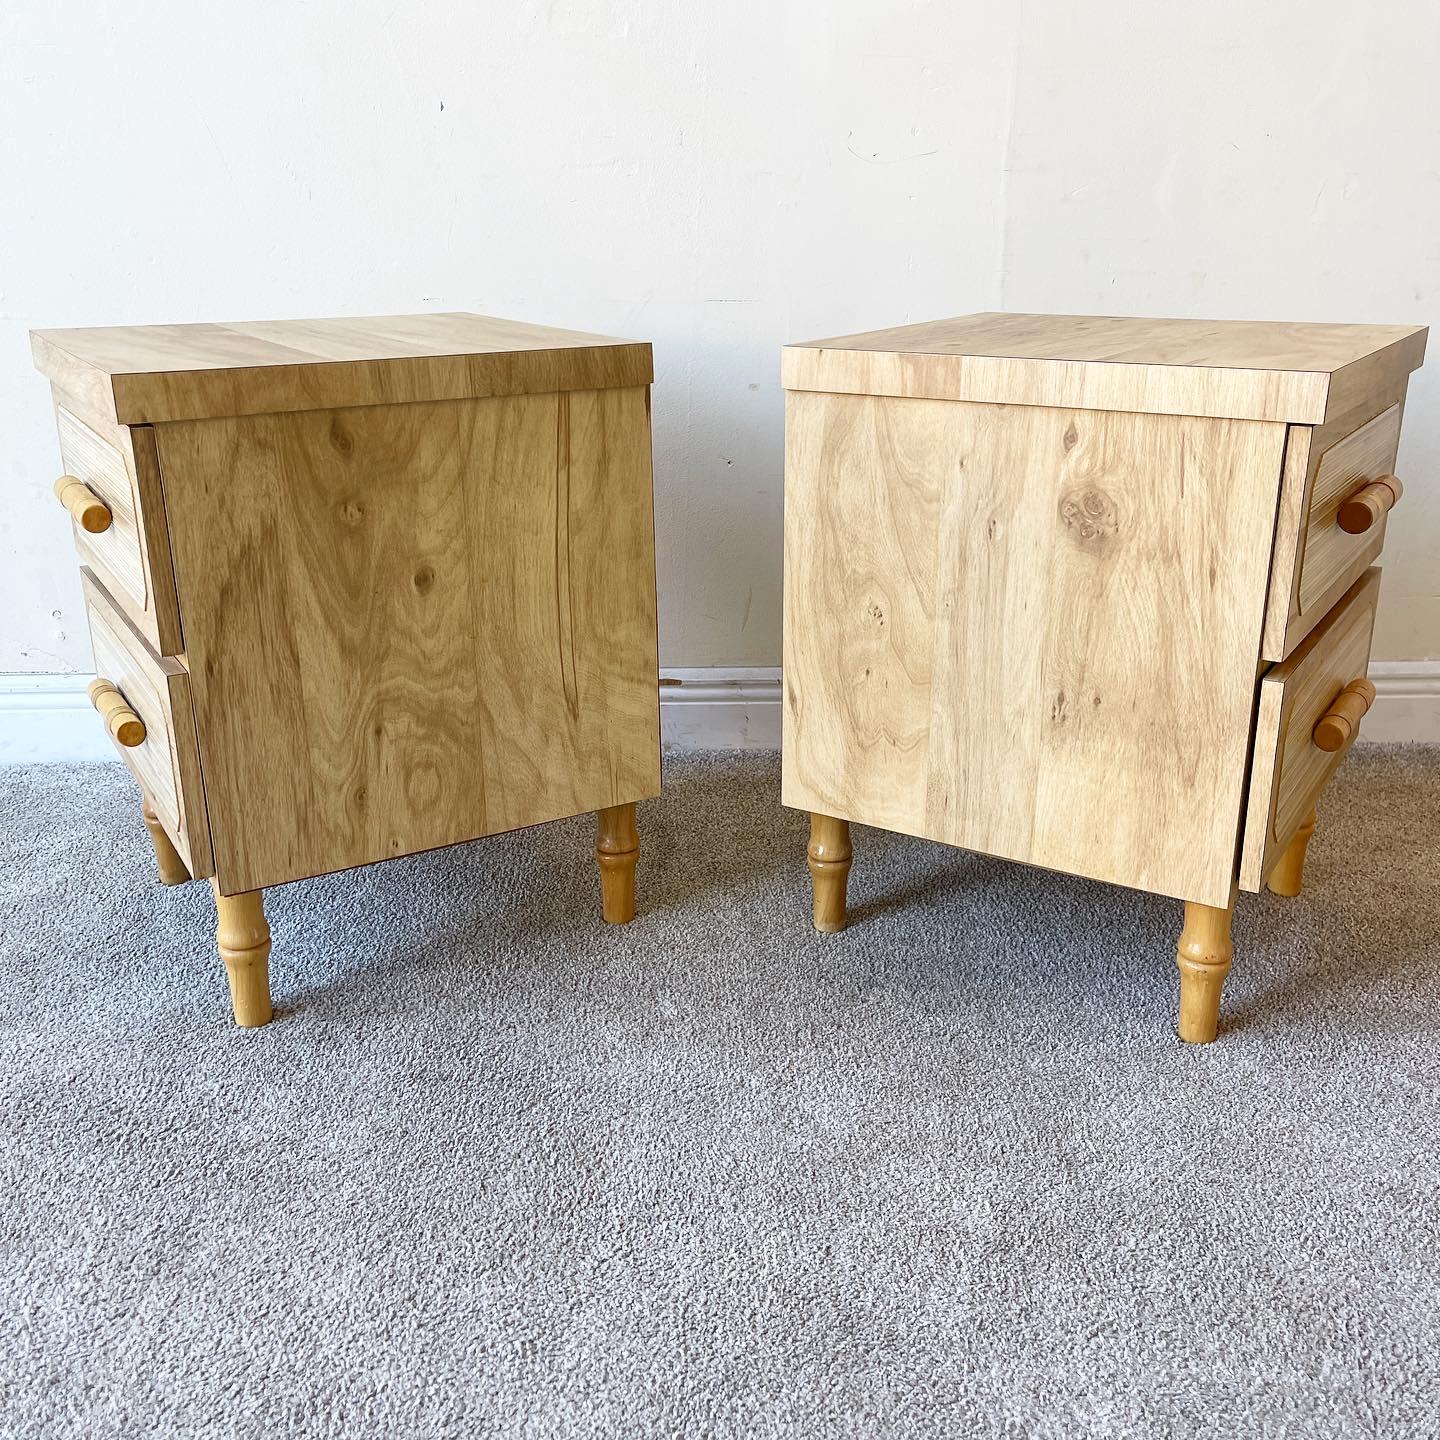 Boho Chic Woodgrain Laminate and Faux Bamboo Nightstands - a Pair In Good Condition For Sale In Delray Beach, FL